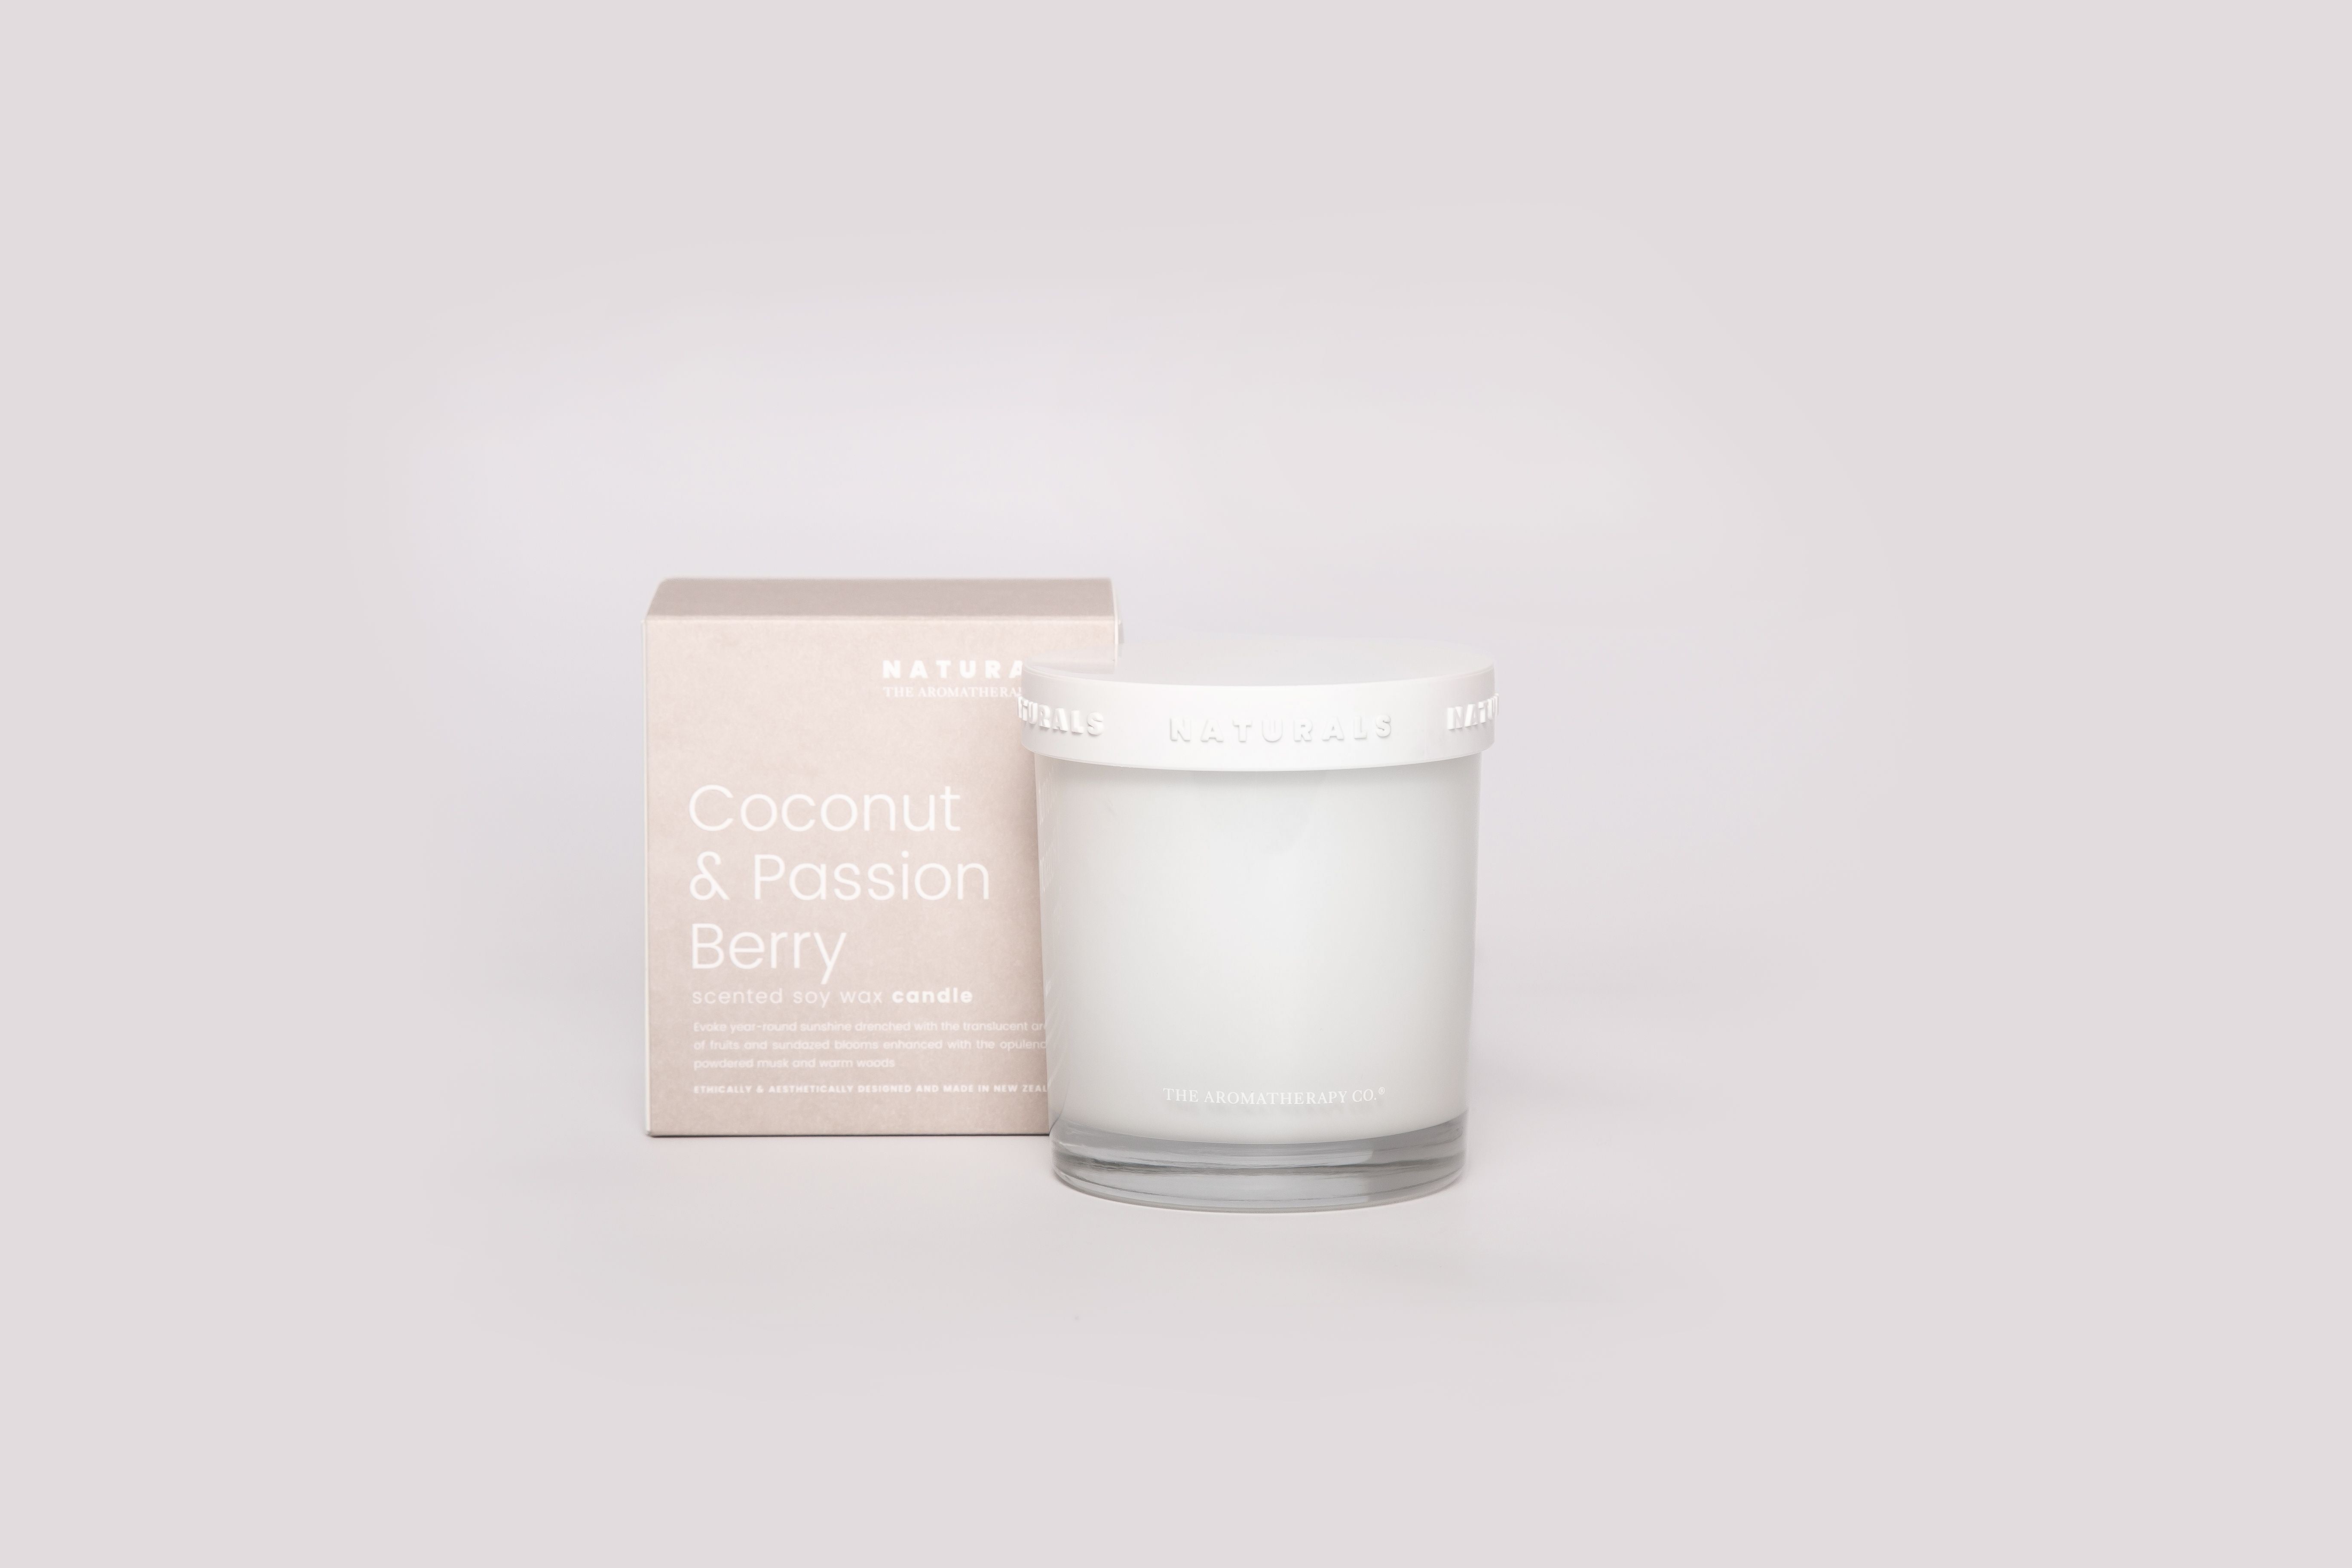 Naturals Candle Coconut & Passion Berry